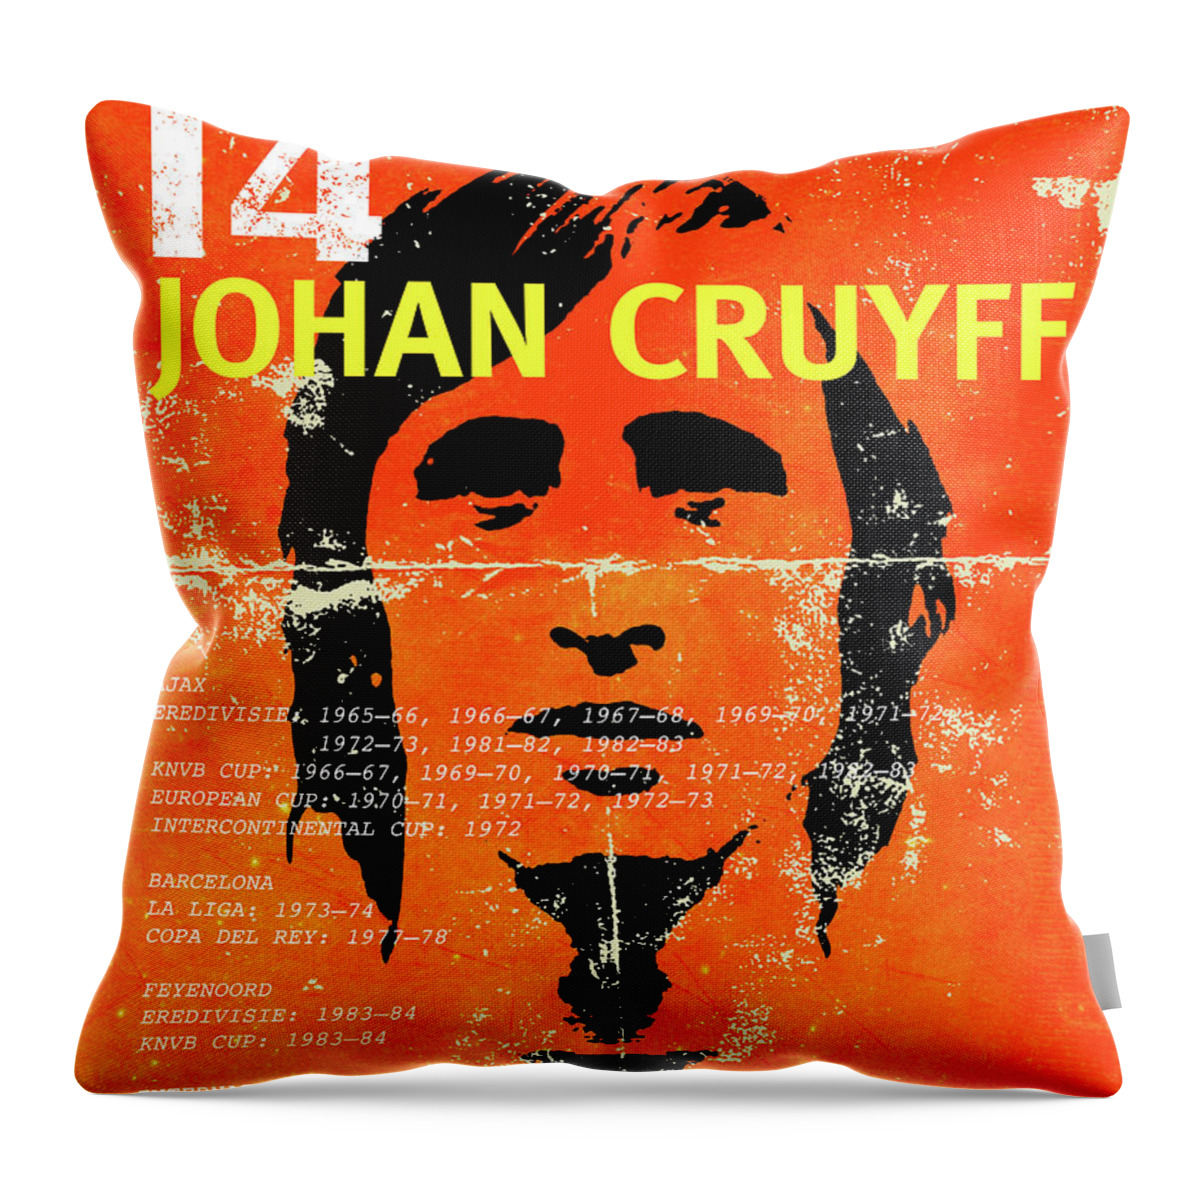 Football Throw Pillow featuring the painting Cruyff by Art Popop